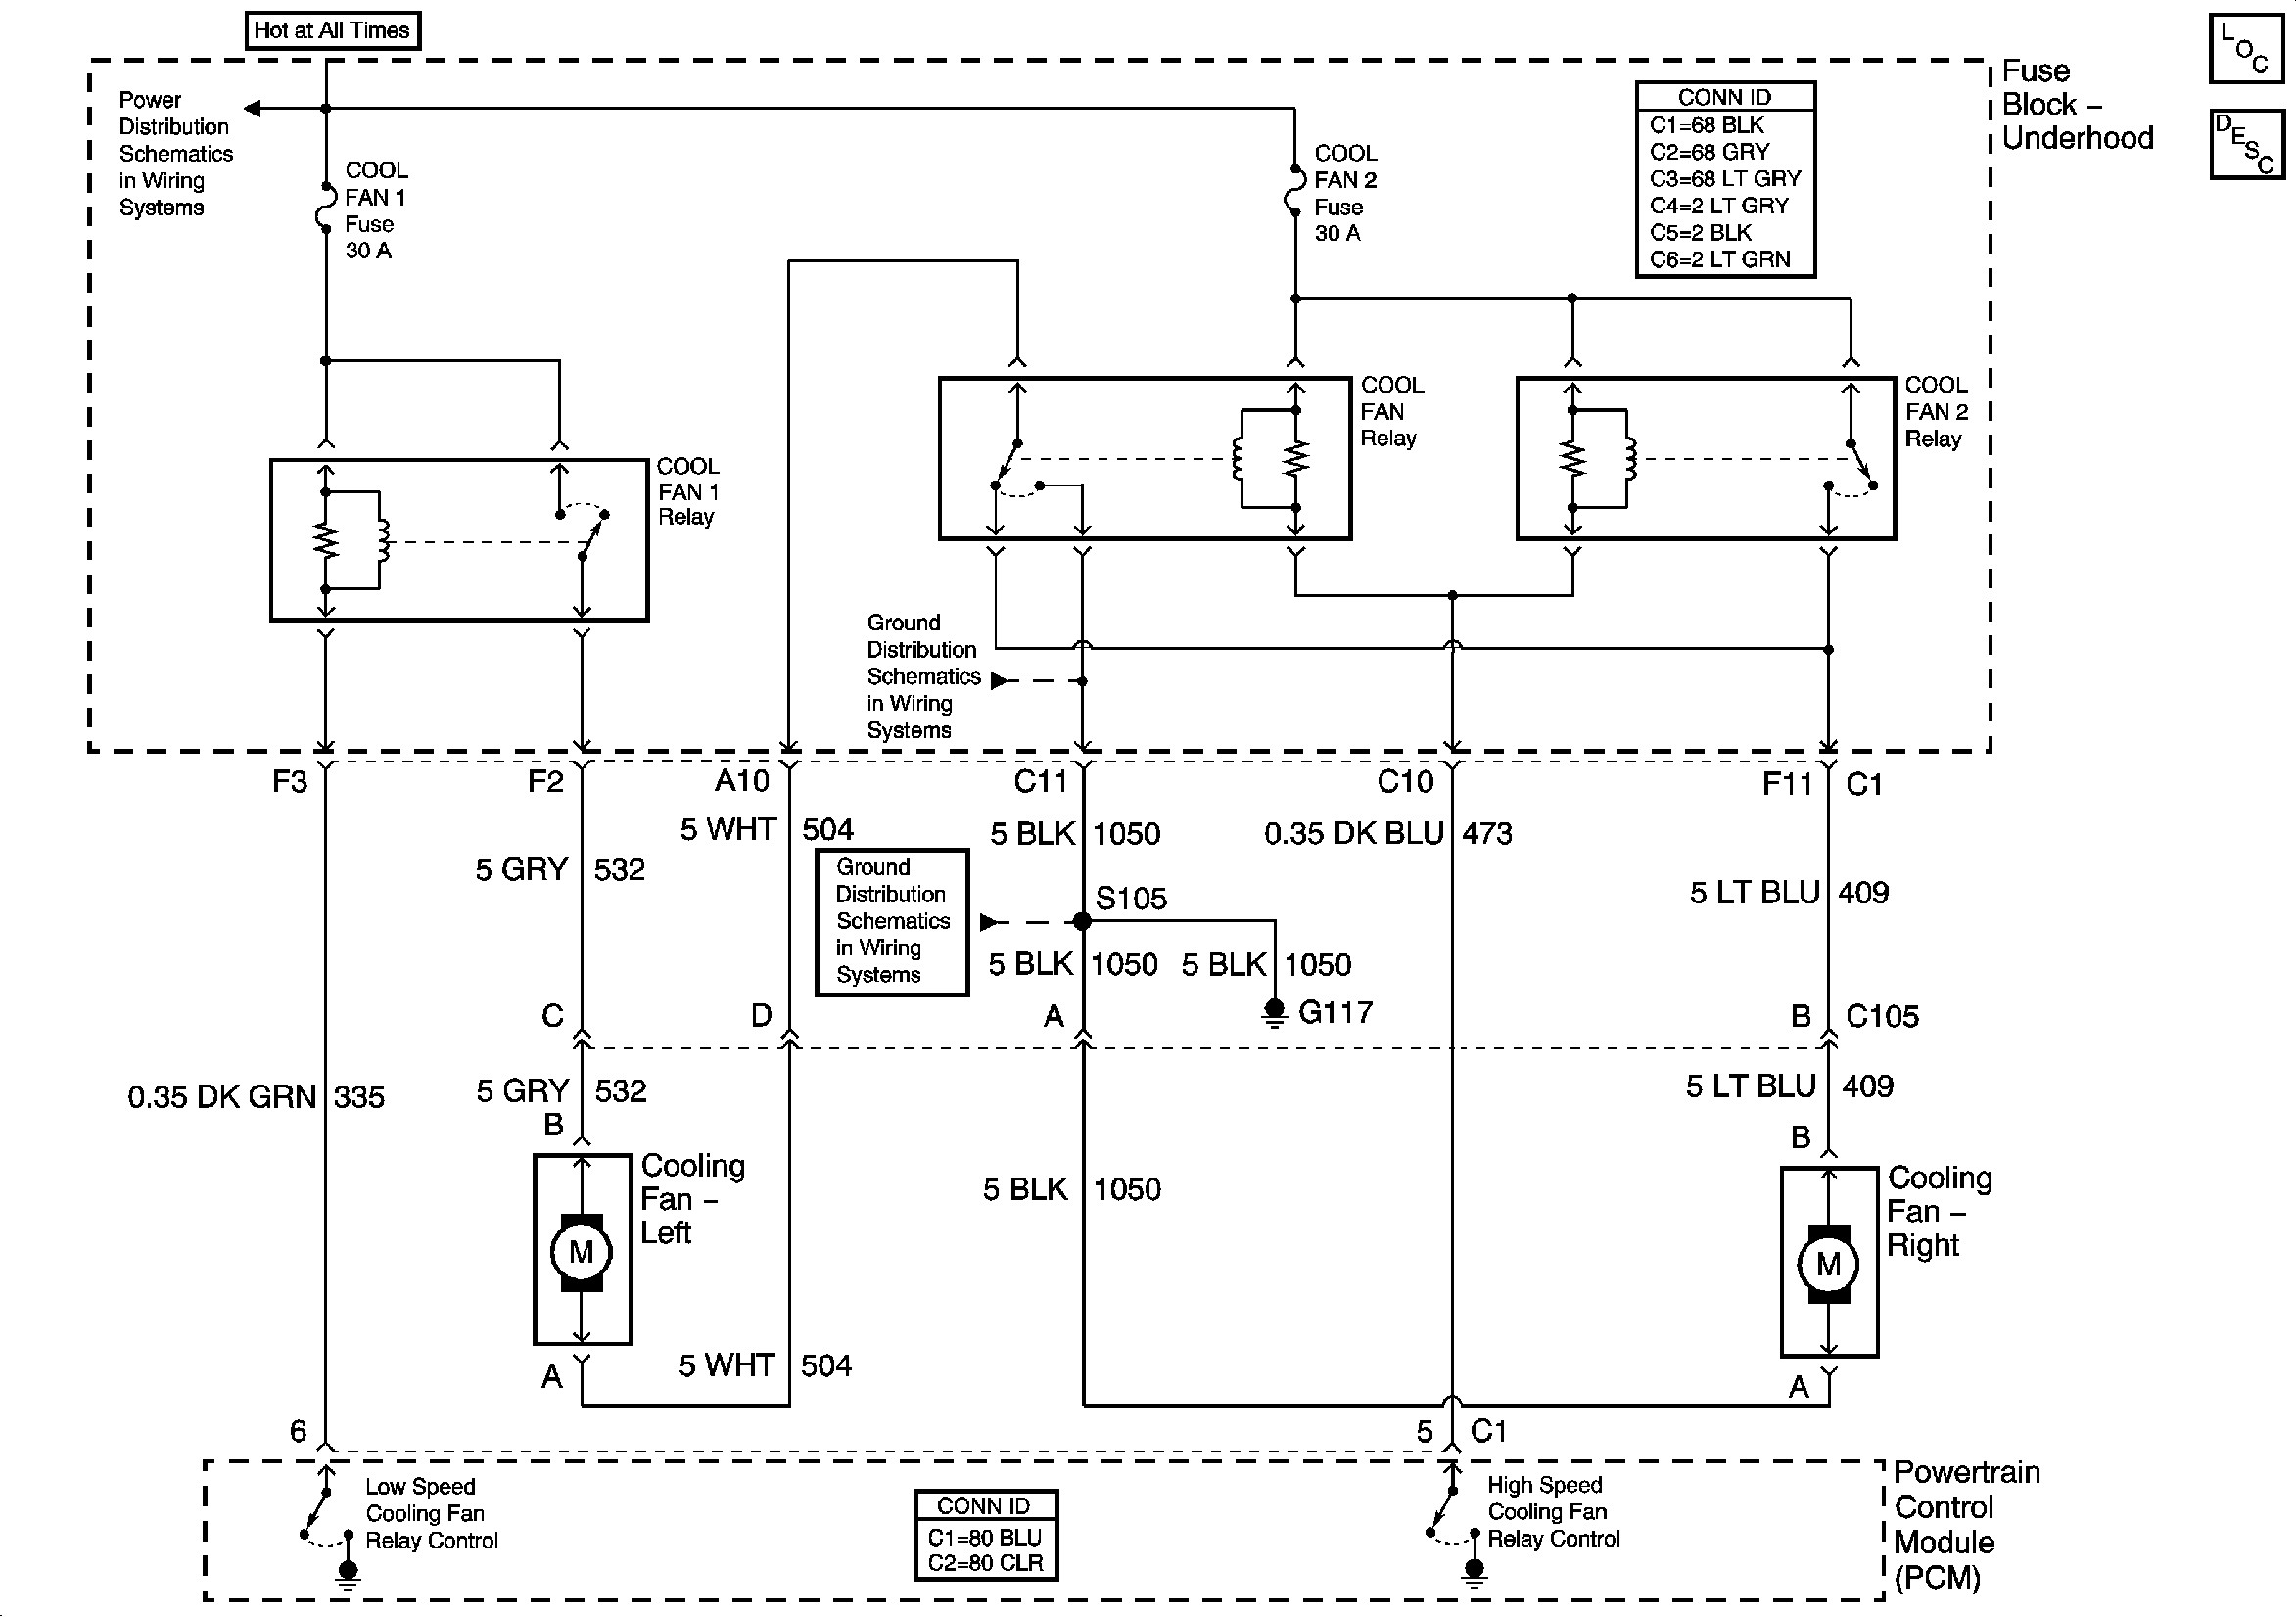 2005 Chevy Malibu Engine Diagram Diagram Likewise Cooling Fan Relay Wiring Diagram to Her with 04 Of 2005 Chevy Malibu Engine Diagram